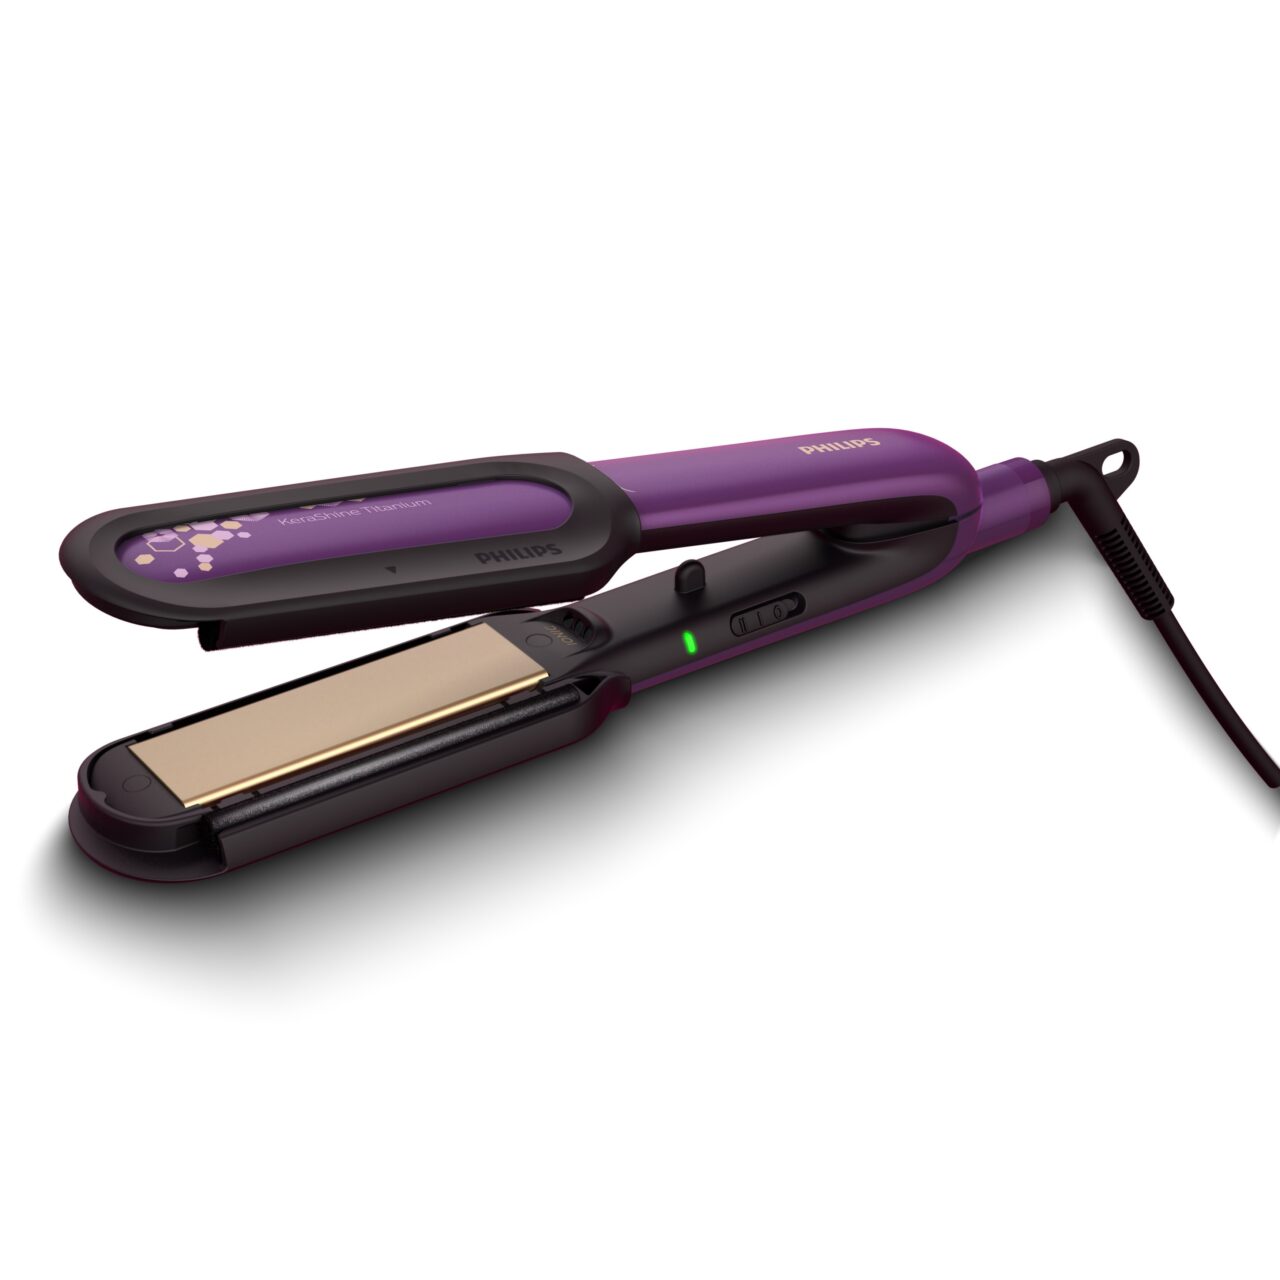 Philips Launches Innovative Hair Straightener with NourishCare Technology